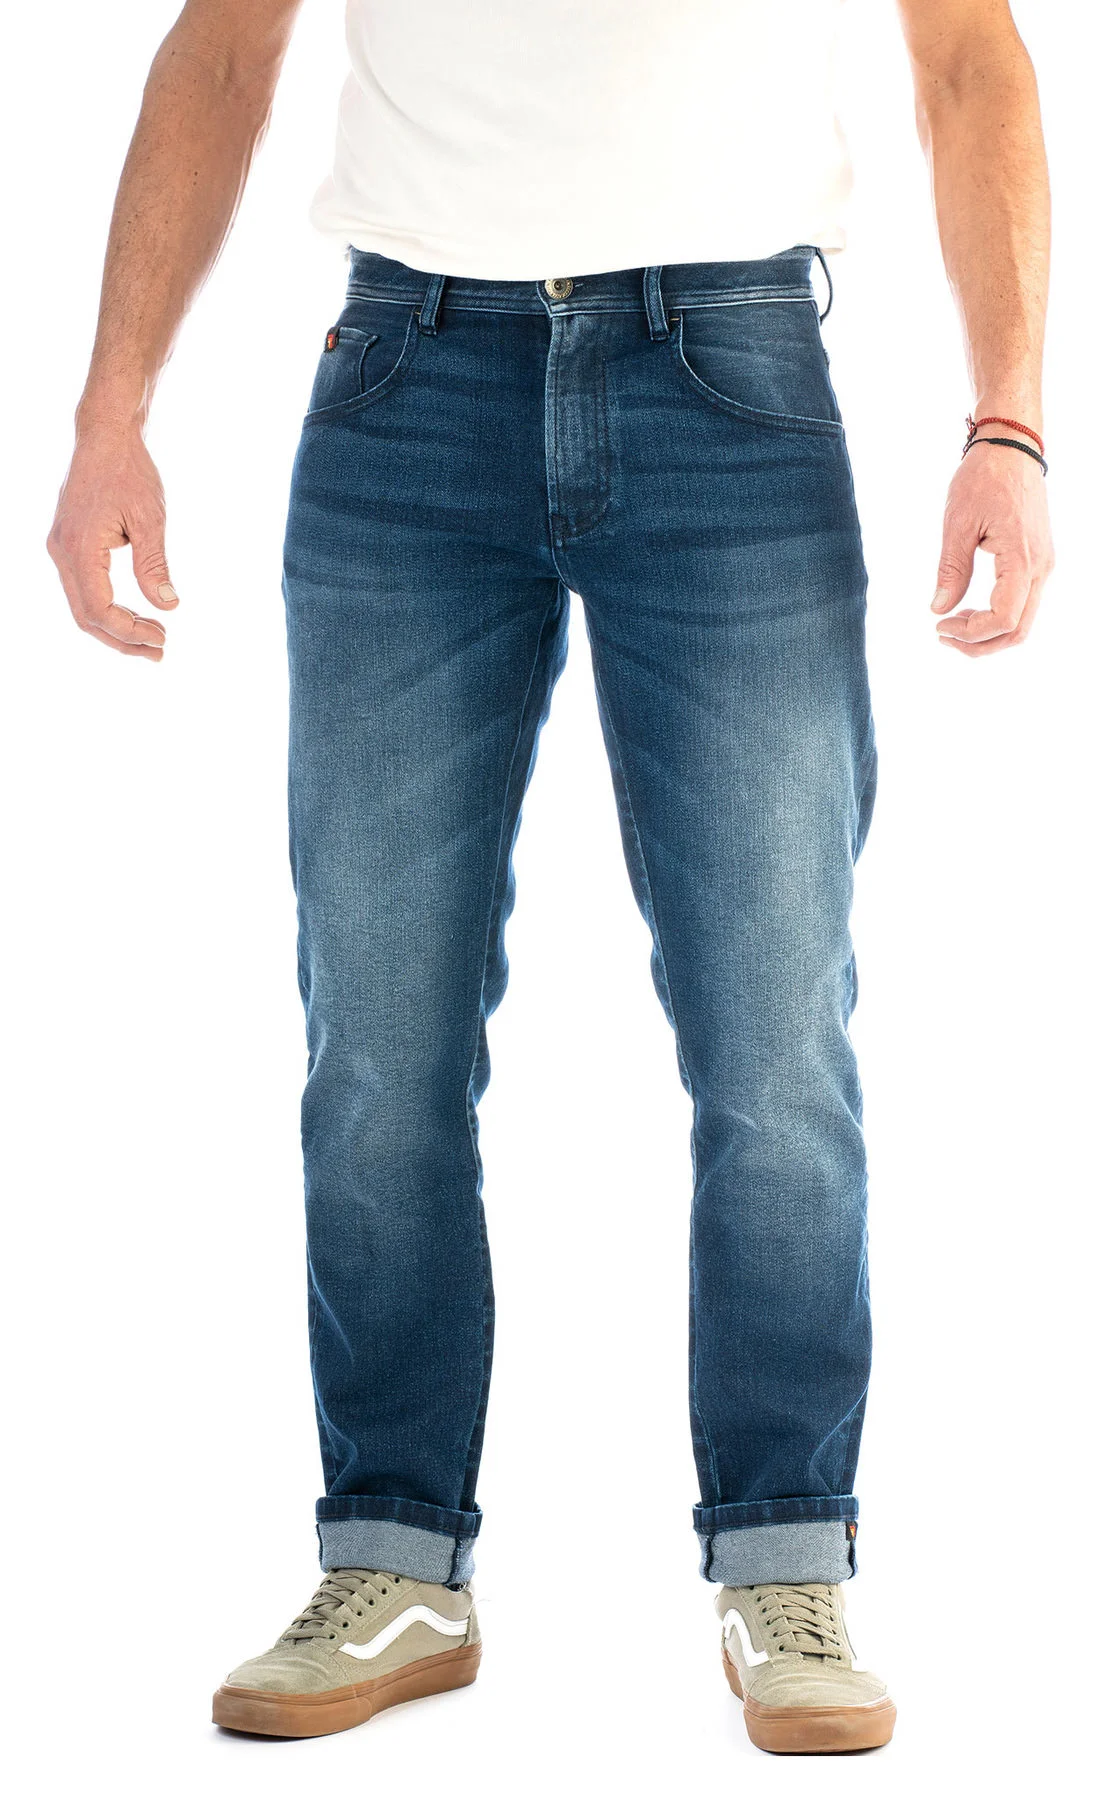 Riding Culture Riding Culture Tapered Slim Jeans Modell 2020